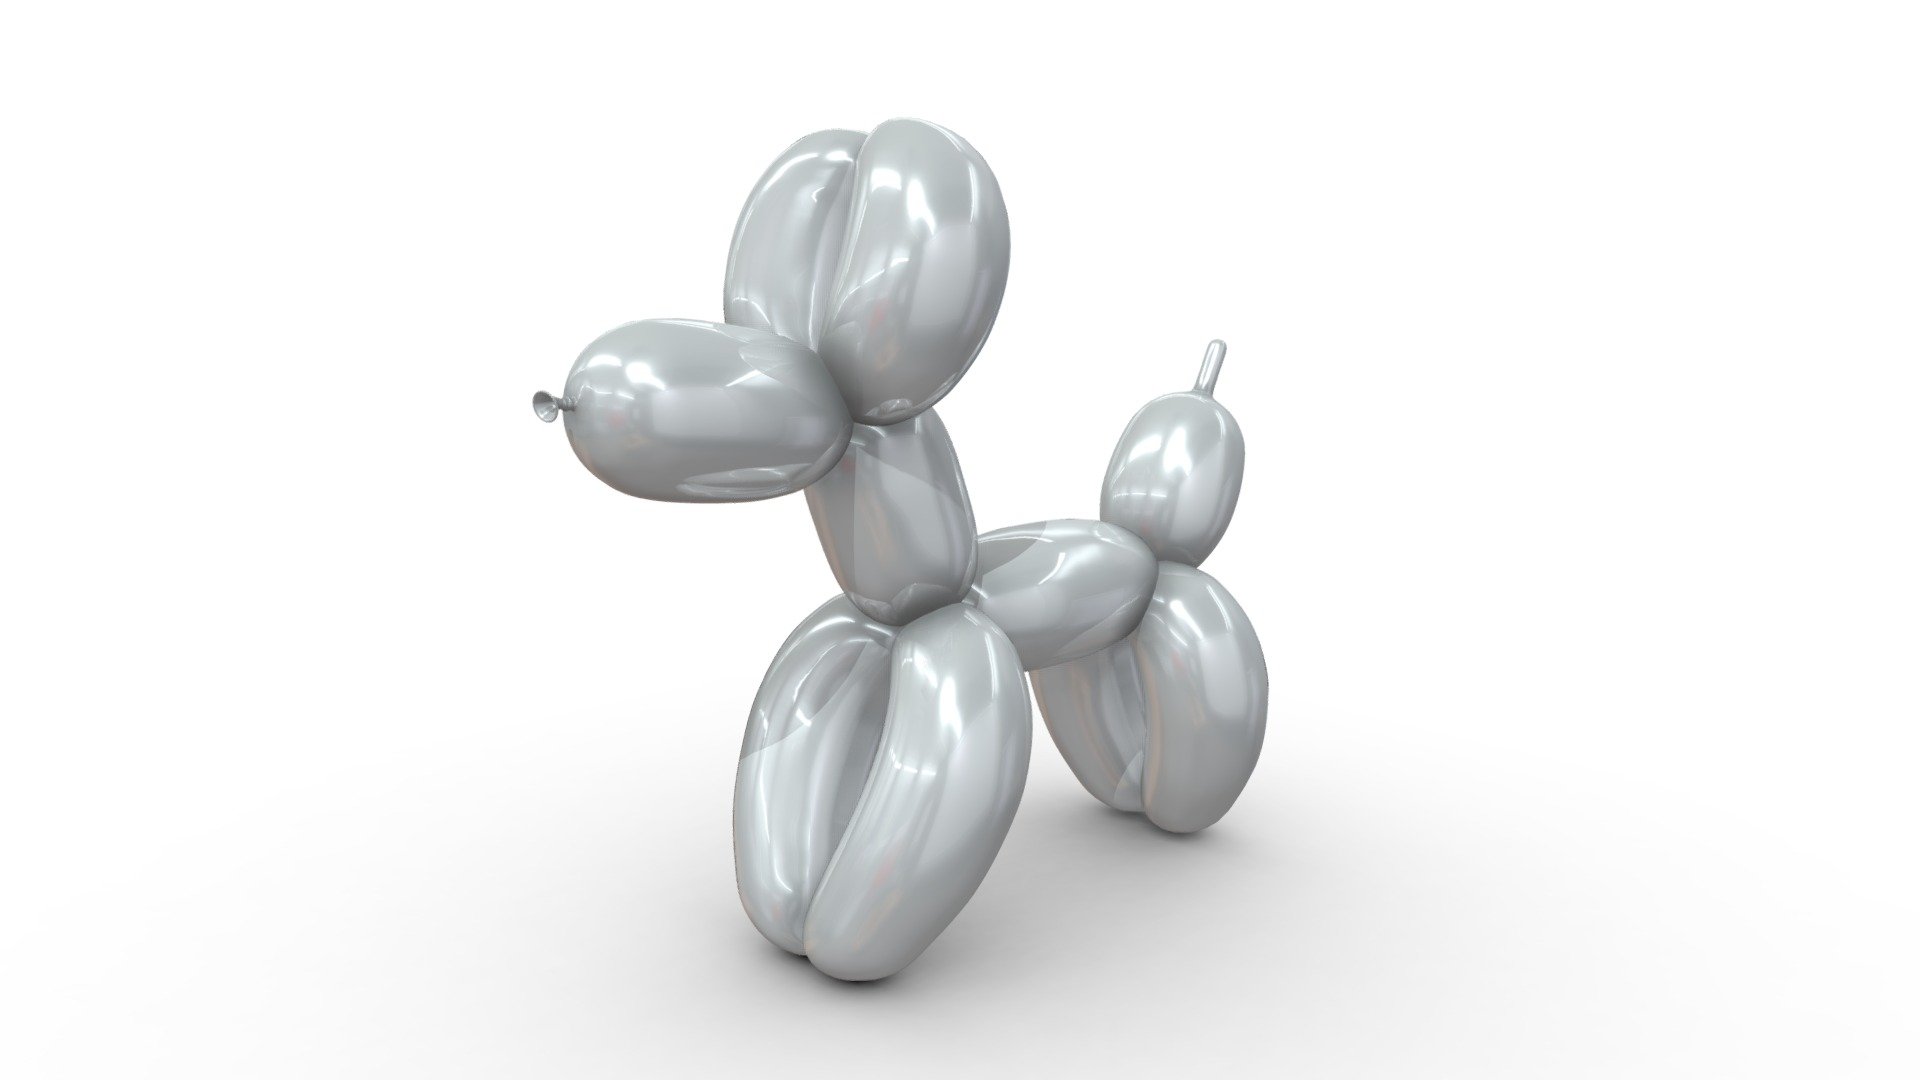 The dog balloon is a fundamental sculpture in the art of balloon animals. Both kids and adults love it.
The model was made using a method that employs the least number of segments to make it lightweight for use in web and 3D applications 3d model